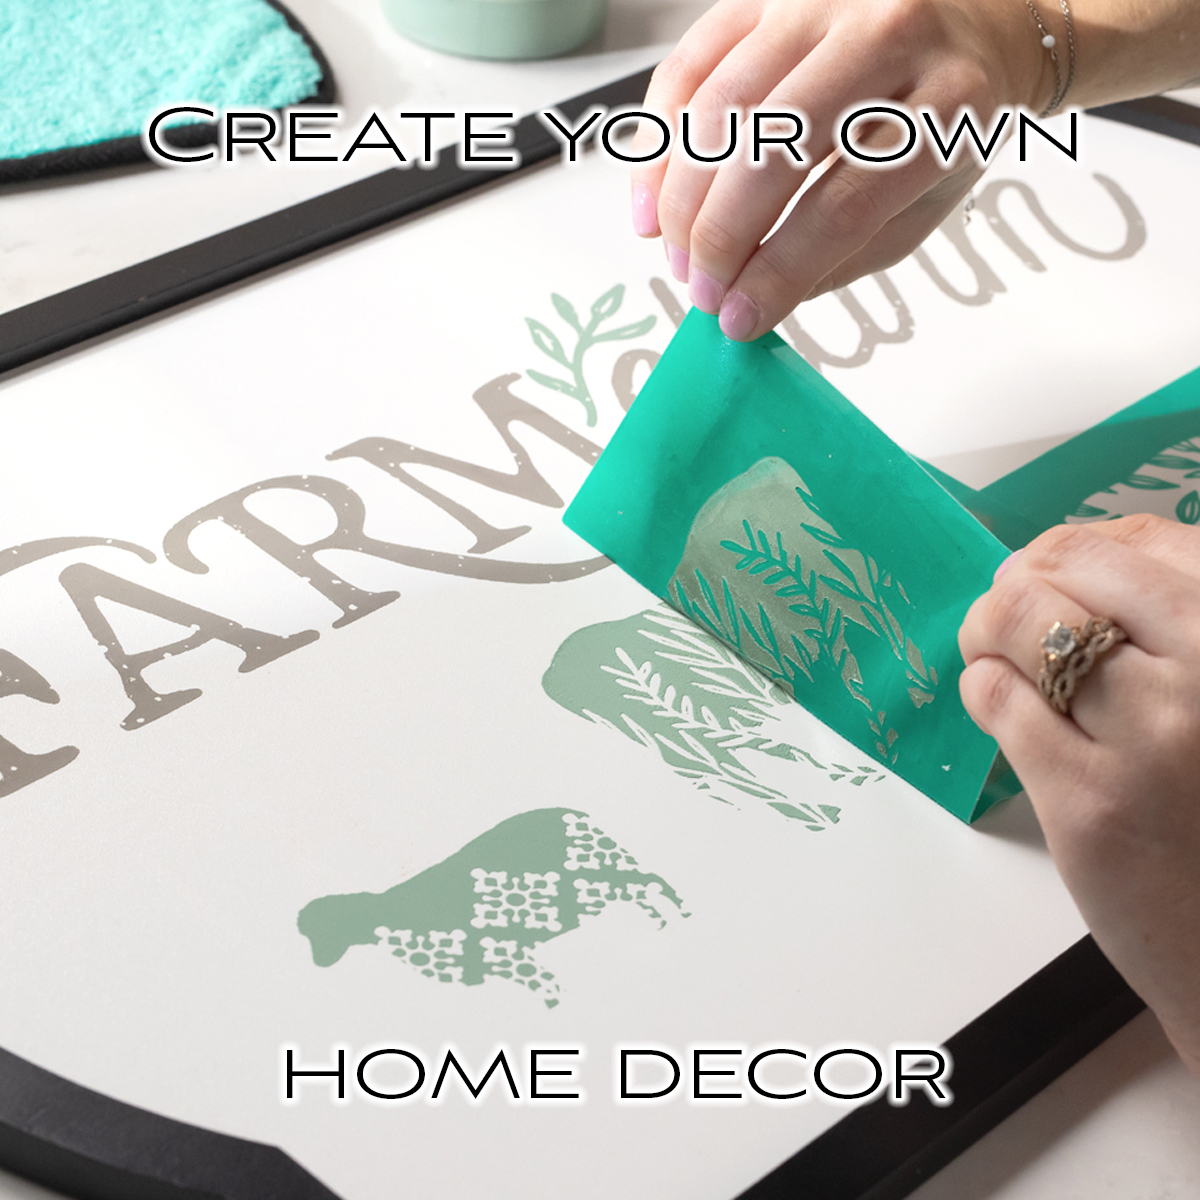 Make your own high end home decor!